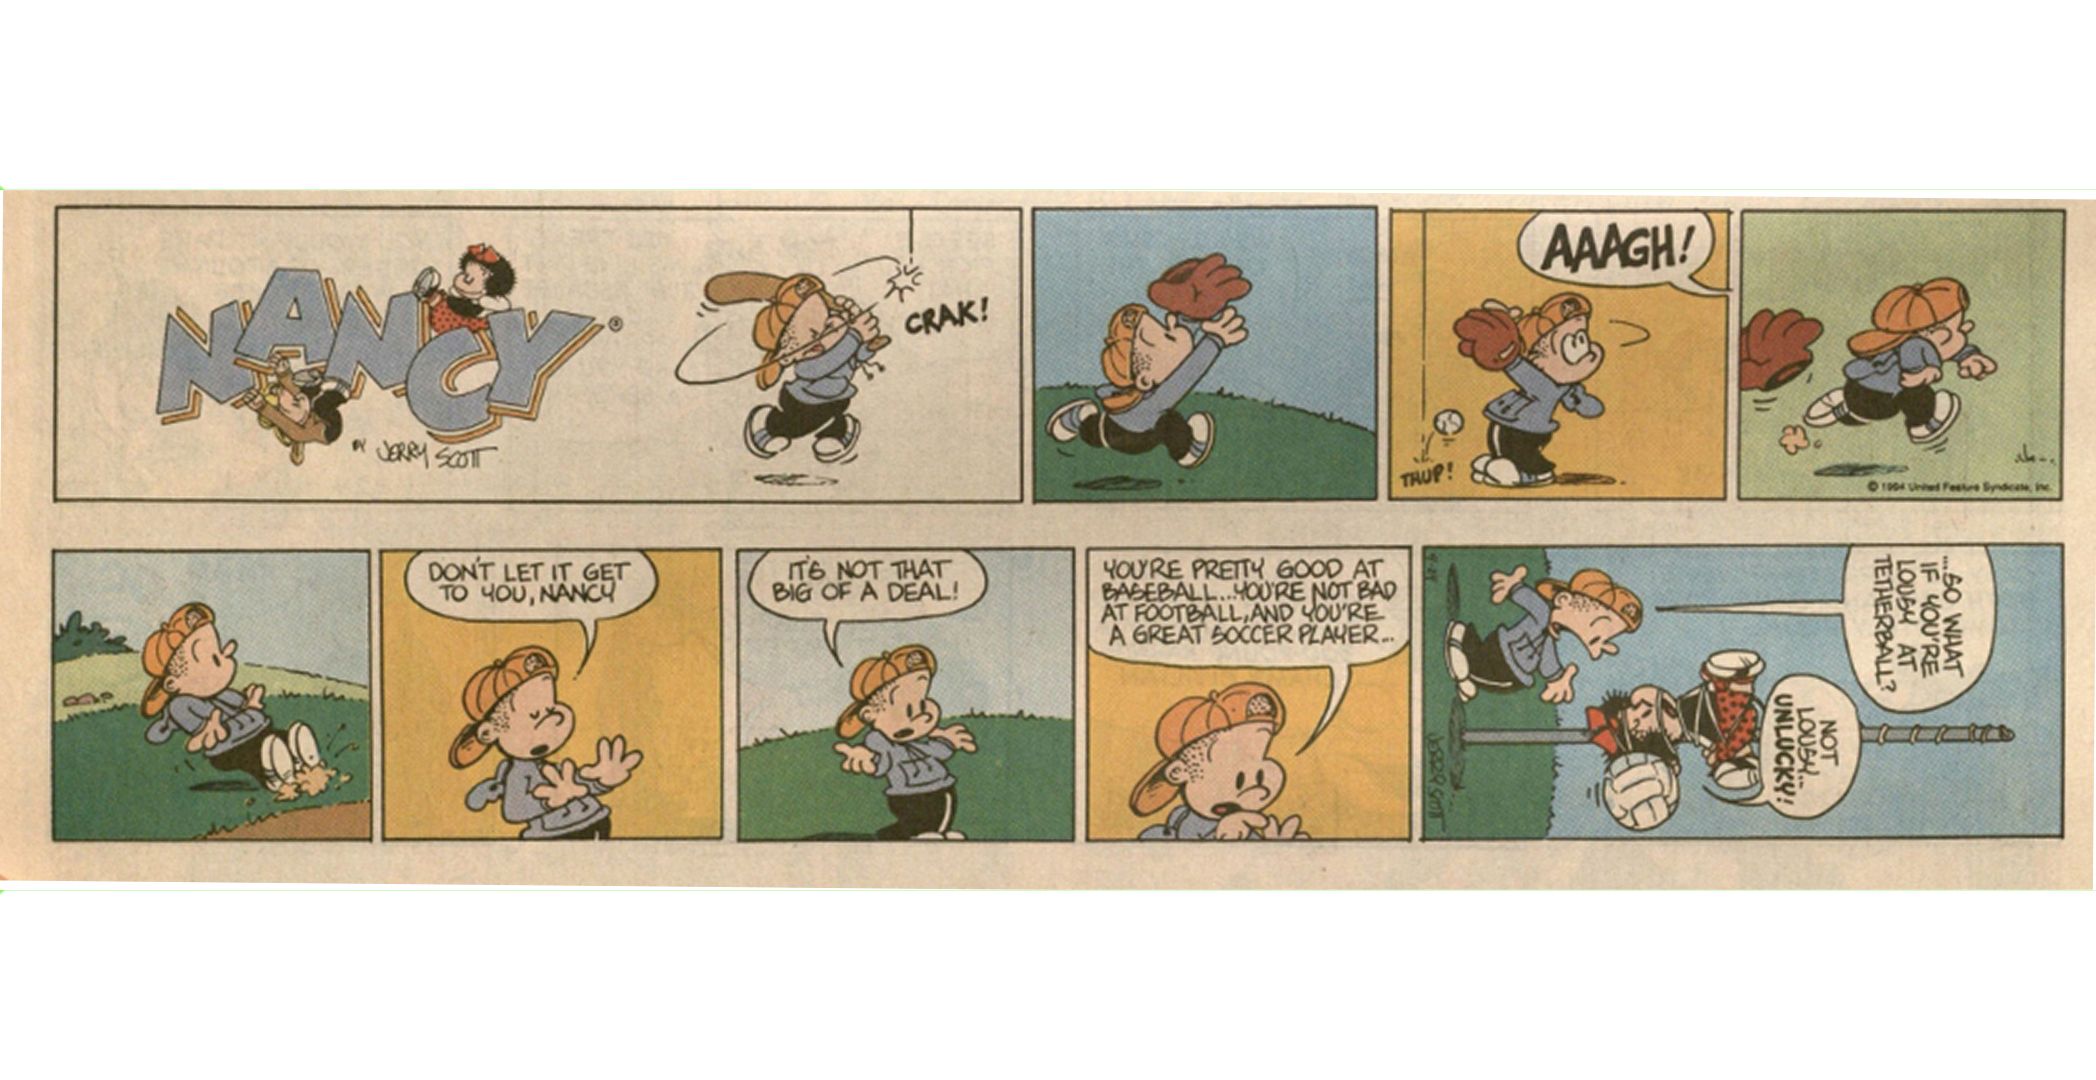 A Sunday color strip from Nancy in the 1990s. Sluggo is playing baseball when he hears Nancy call for help. He tries to remind her of all the sports she's good at, even though she's really bad at tetherball.